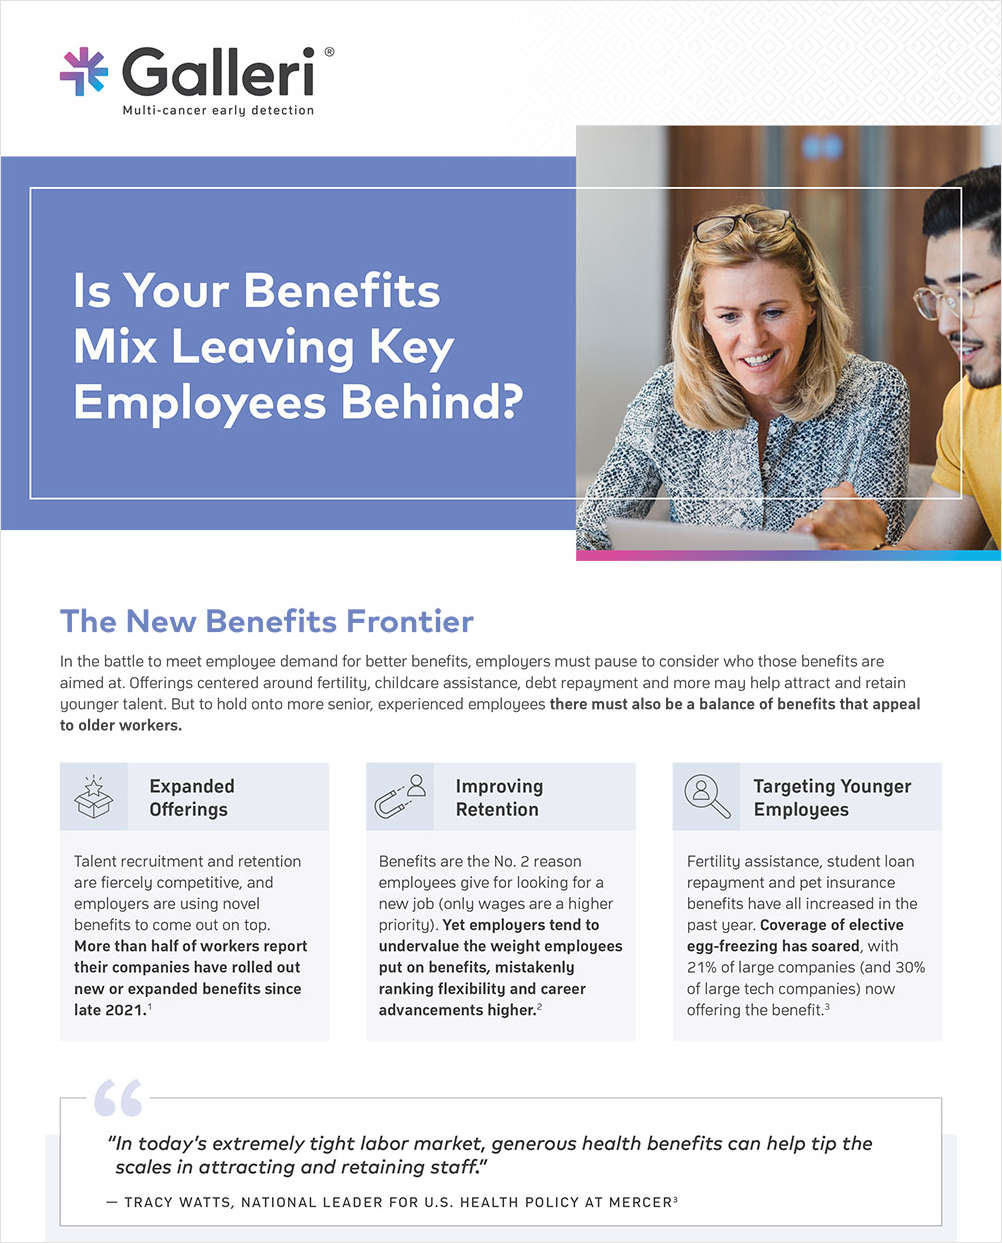 Is Your Benefits Mix Leaving Key Employees Behind?